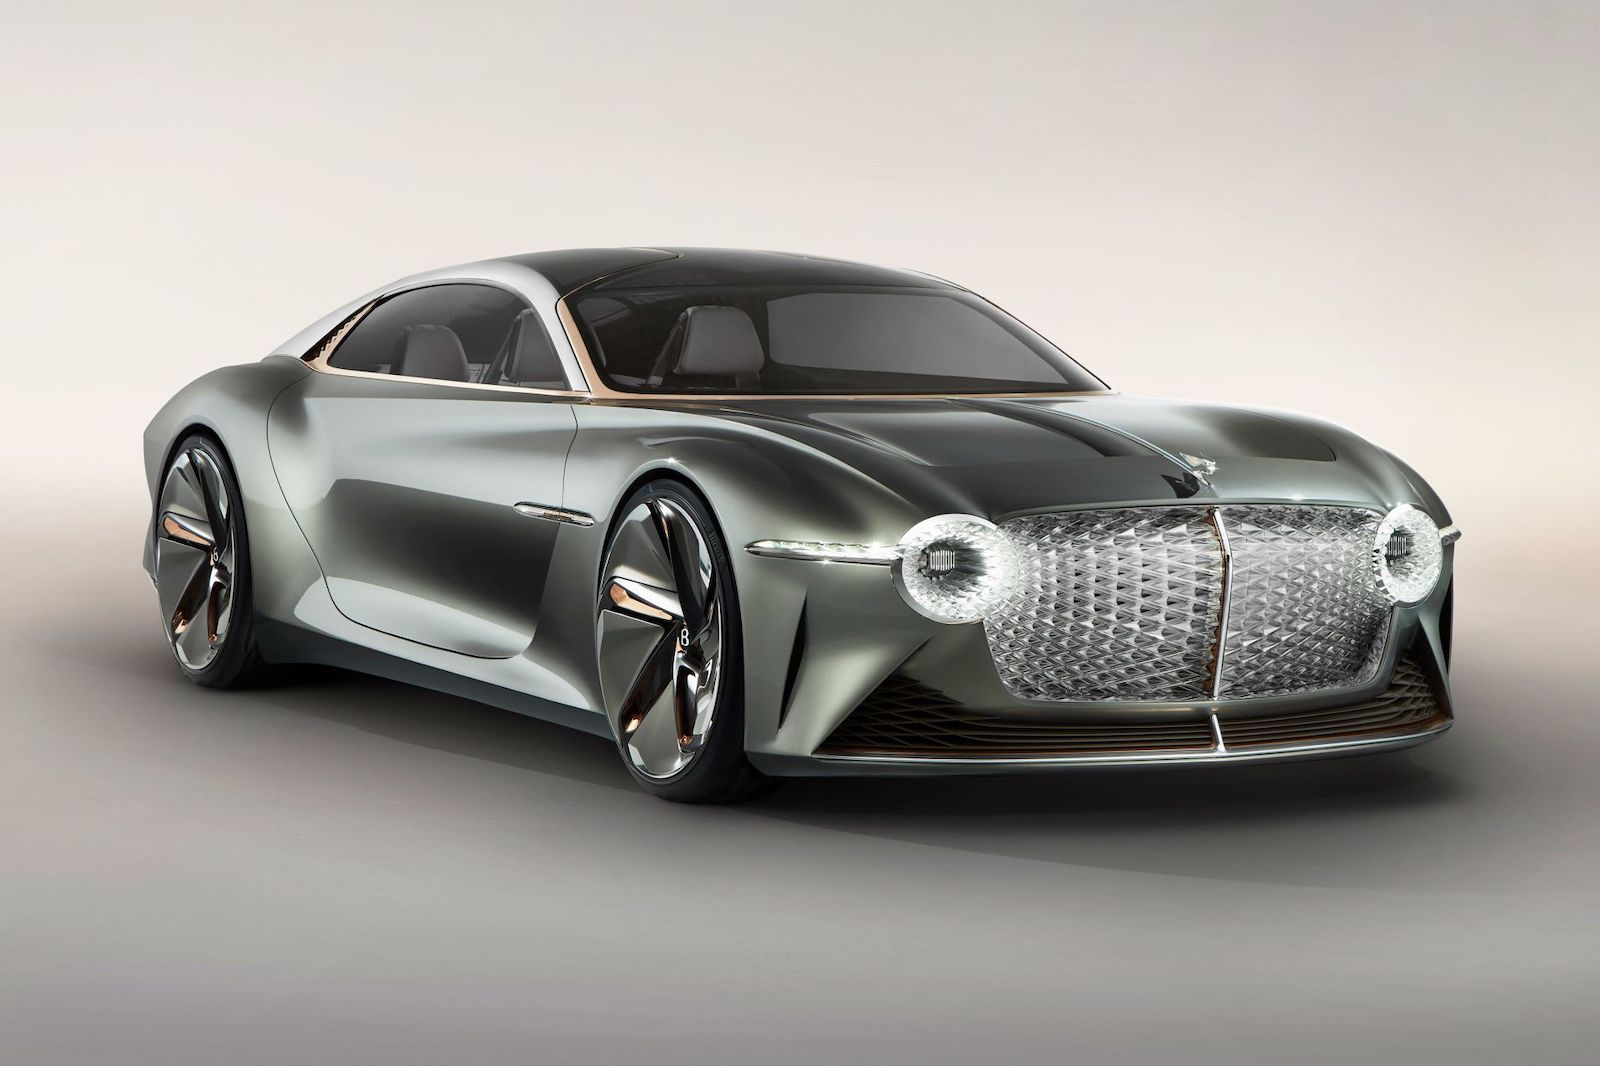 Bentley's Electric Coupe - The EXP 100 GT Concept Car